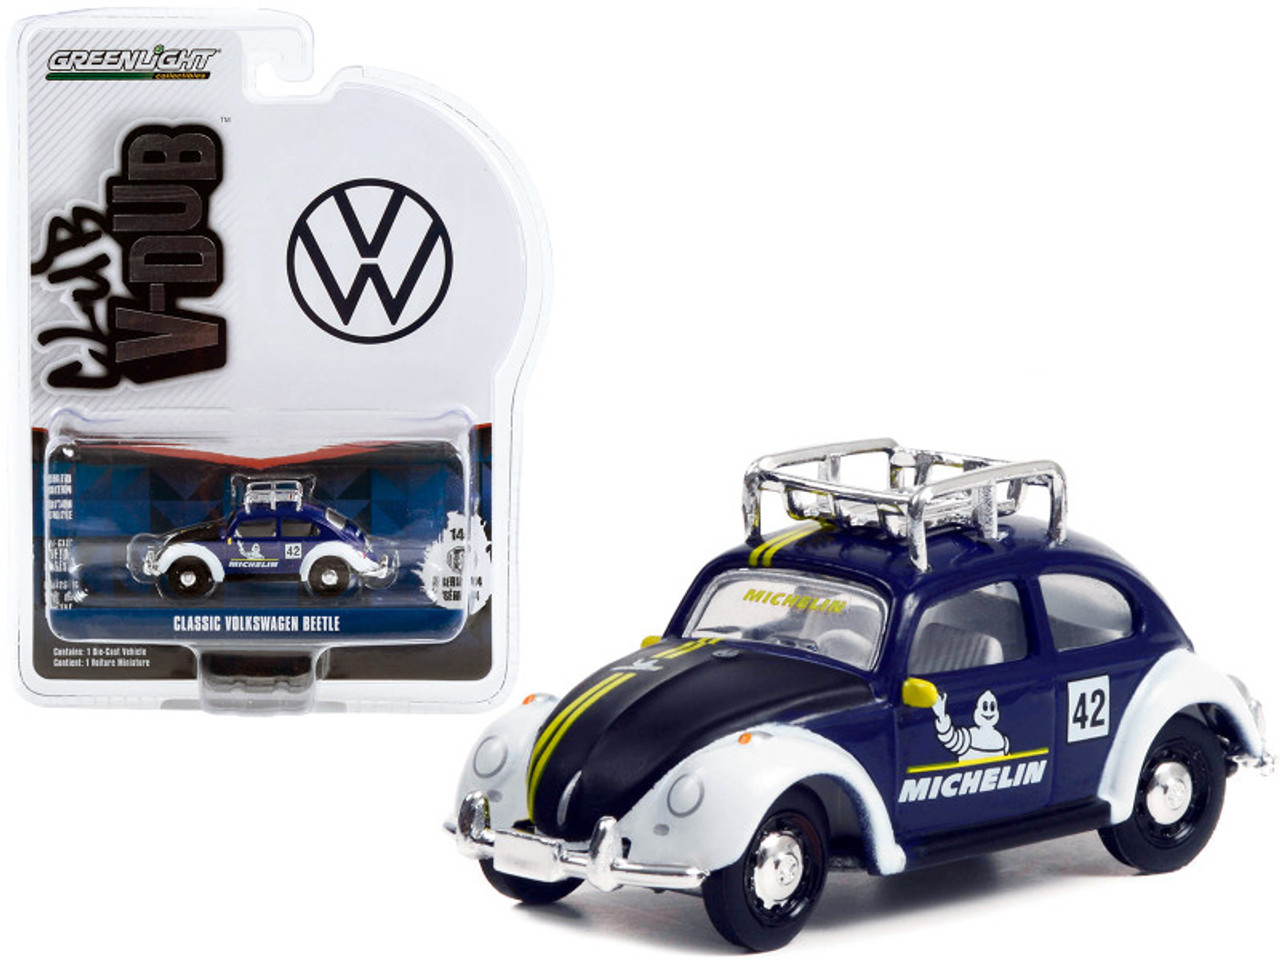 Classic Volkswagen Beetle #42 with Roof Rack "Michelin Tires" "Club Vee-Dub Series 14" 1/64 Diecast Model Car by Greenlight